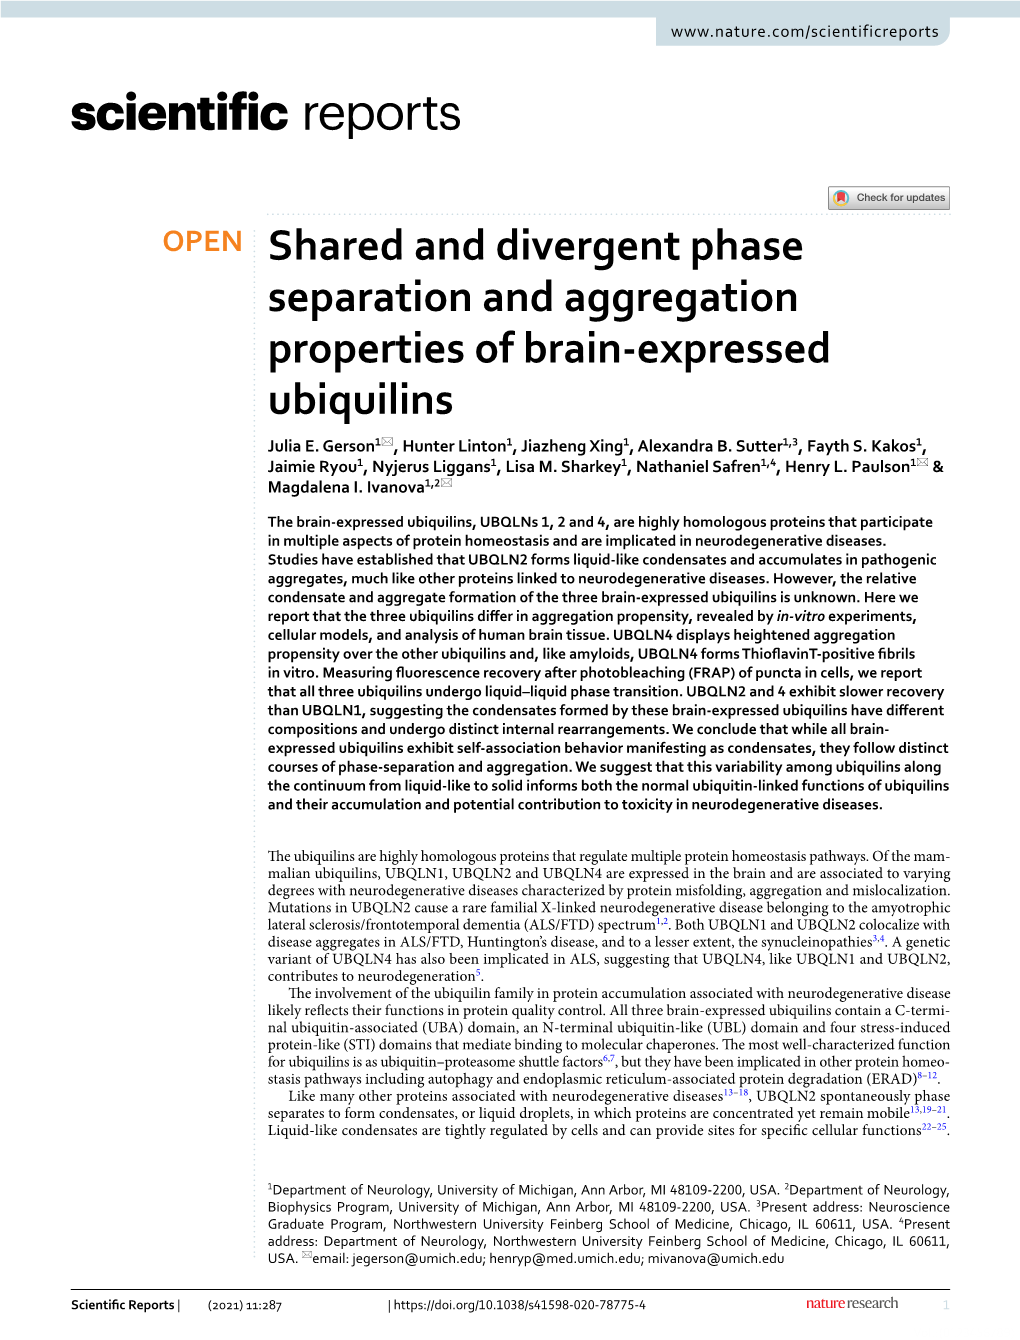 Shared and Divergent Phase Separation and Aggregation Properties of Brain‑Expressed Ubiquilins Julia E